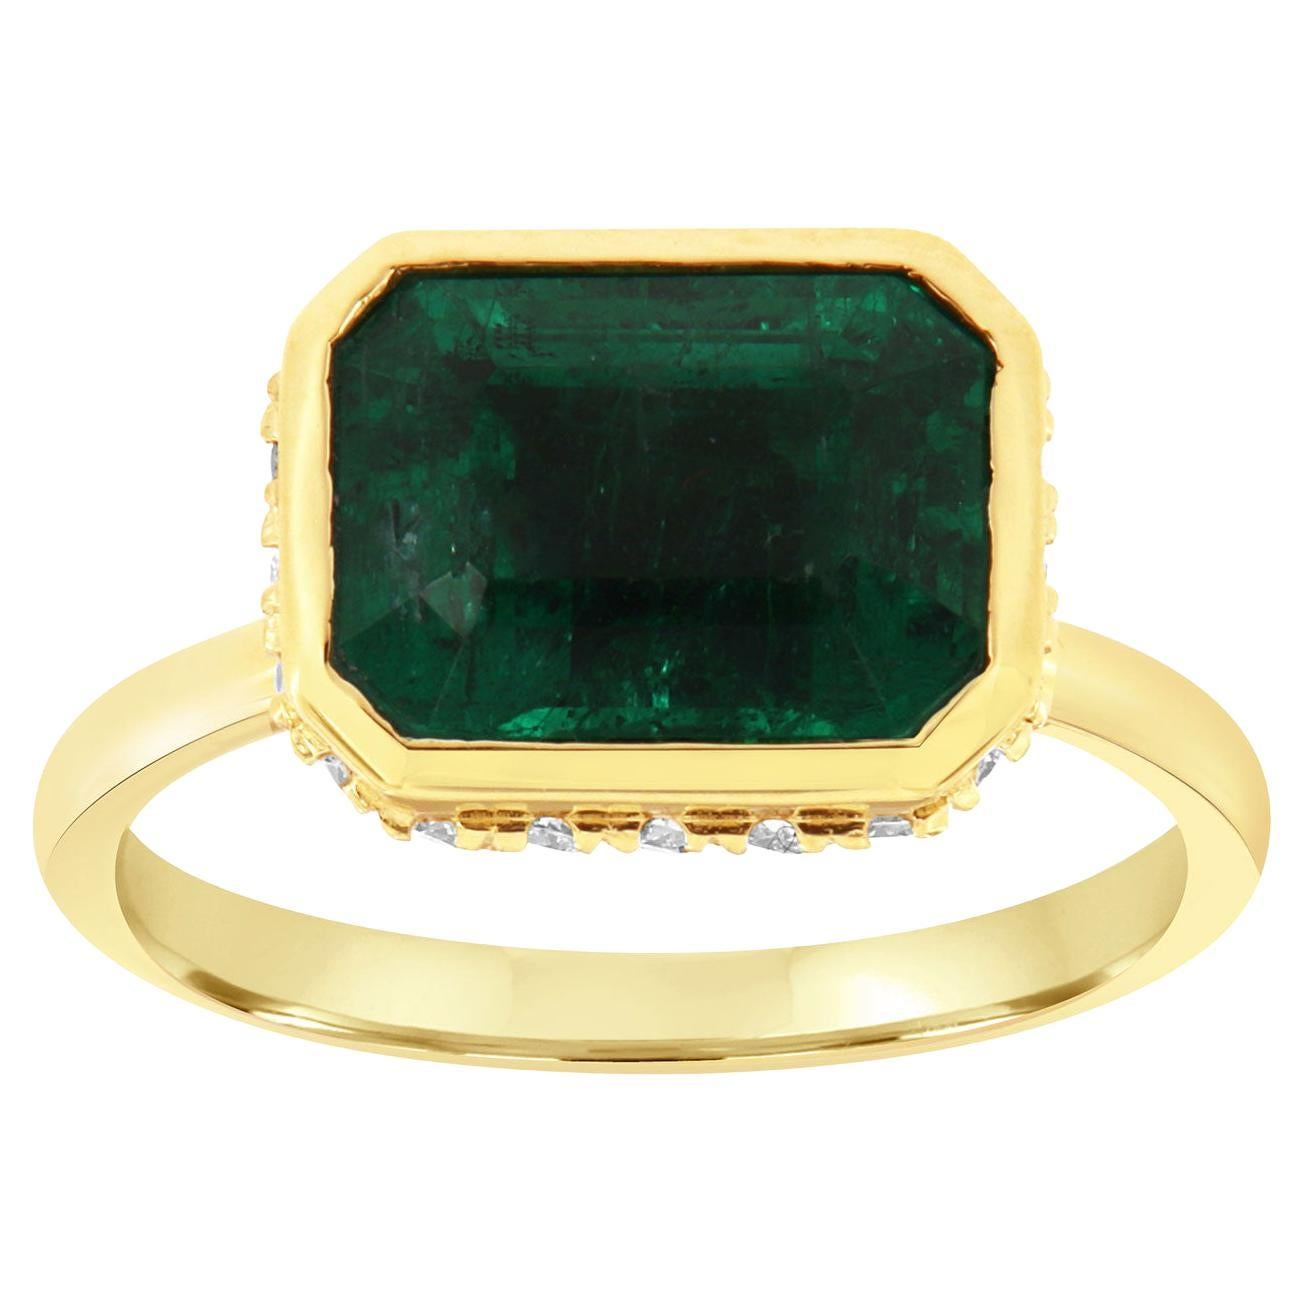 GIA Certified 3.23 Carat Green Emerald 18k Yellow Gold Diamond Ring For Sale